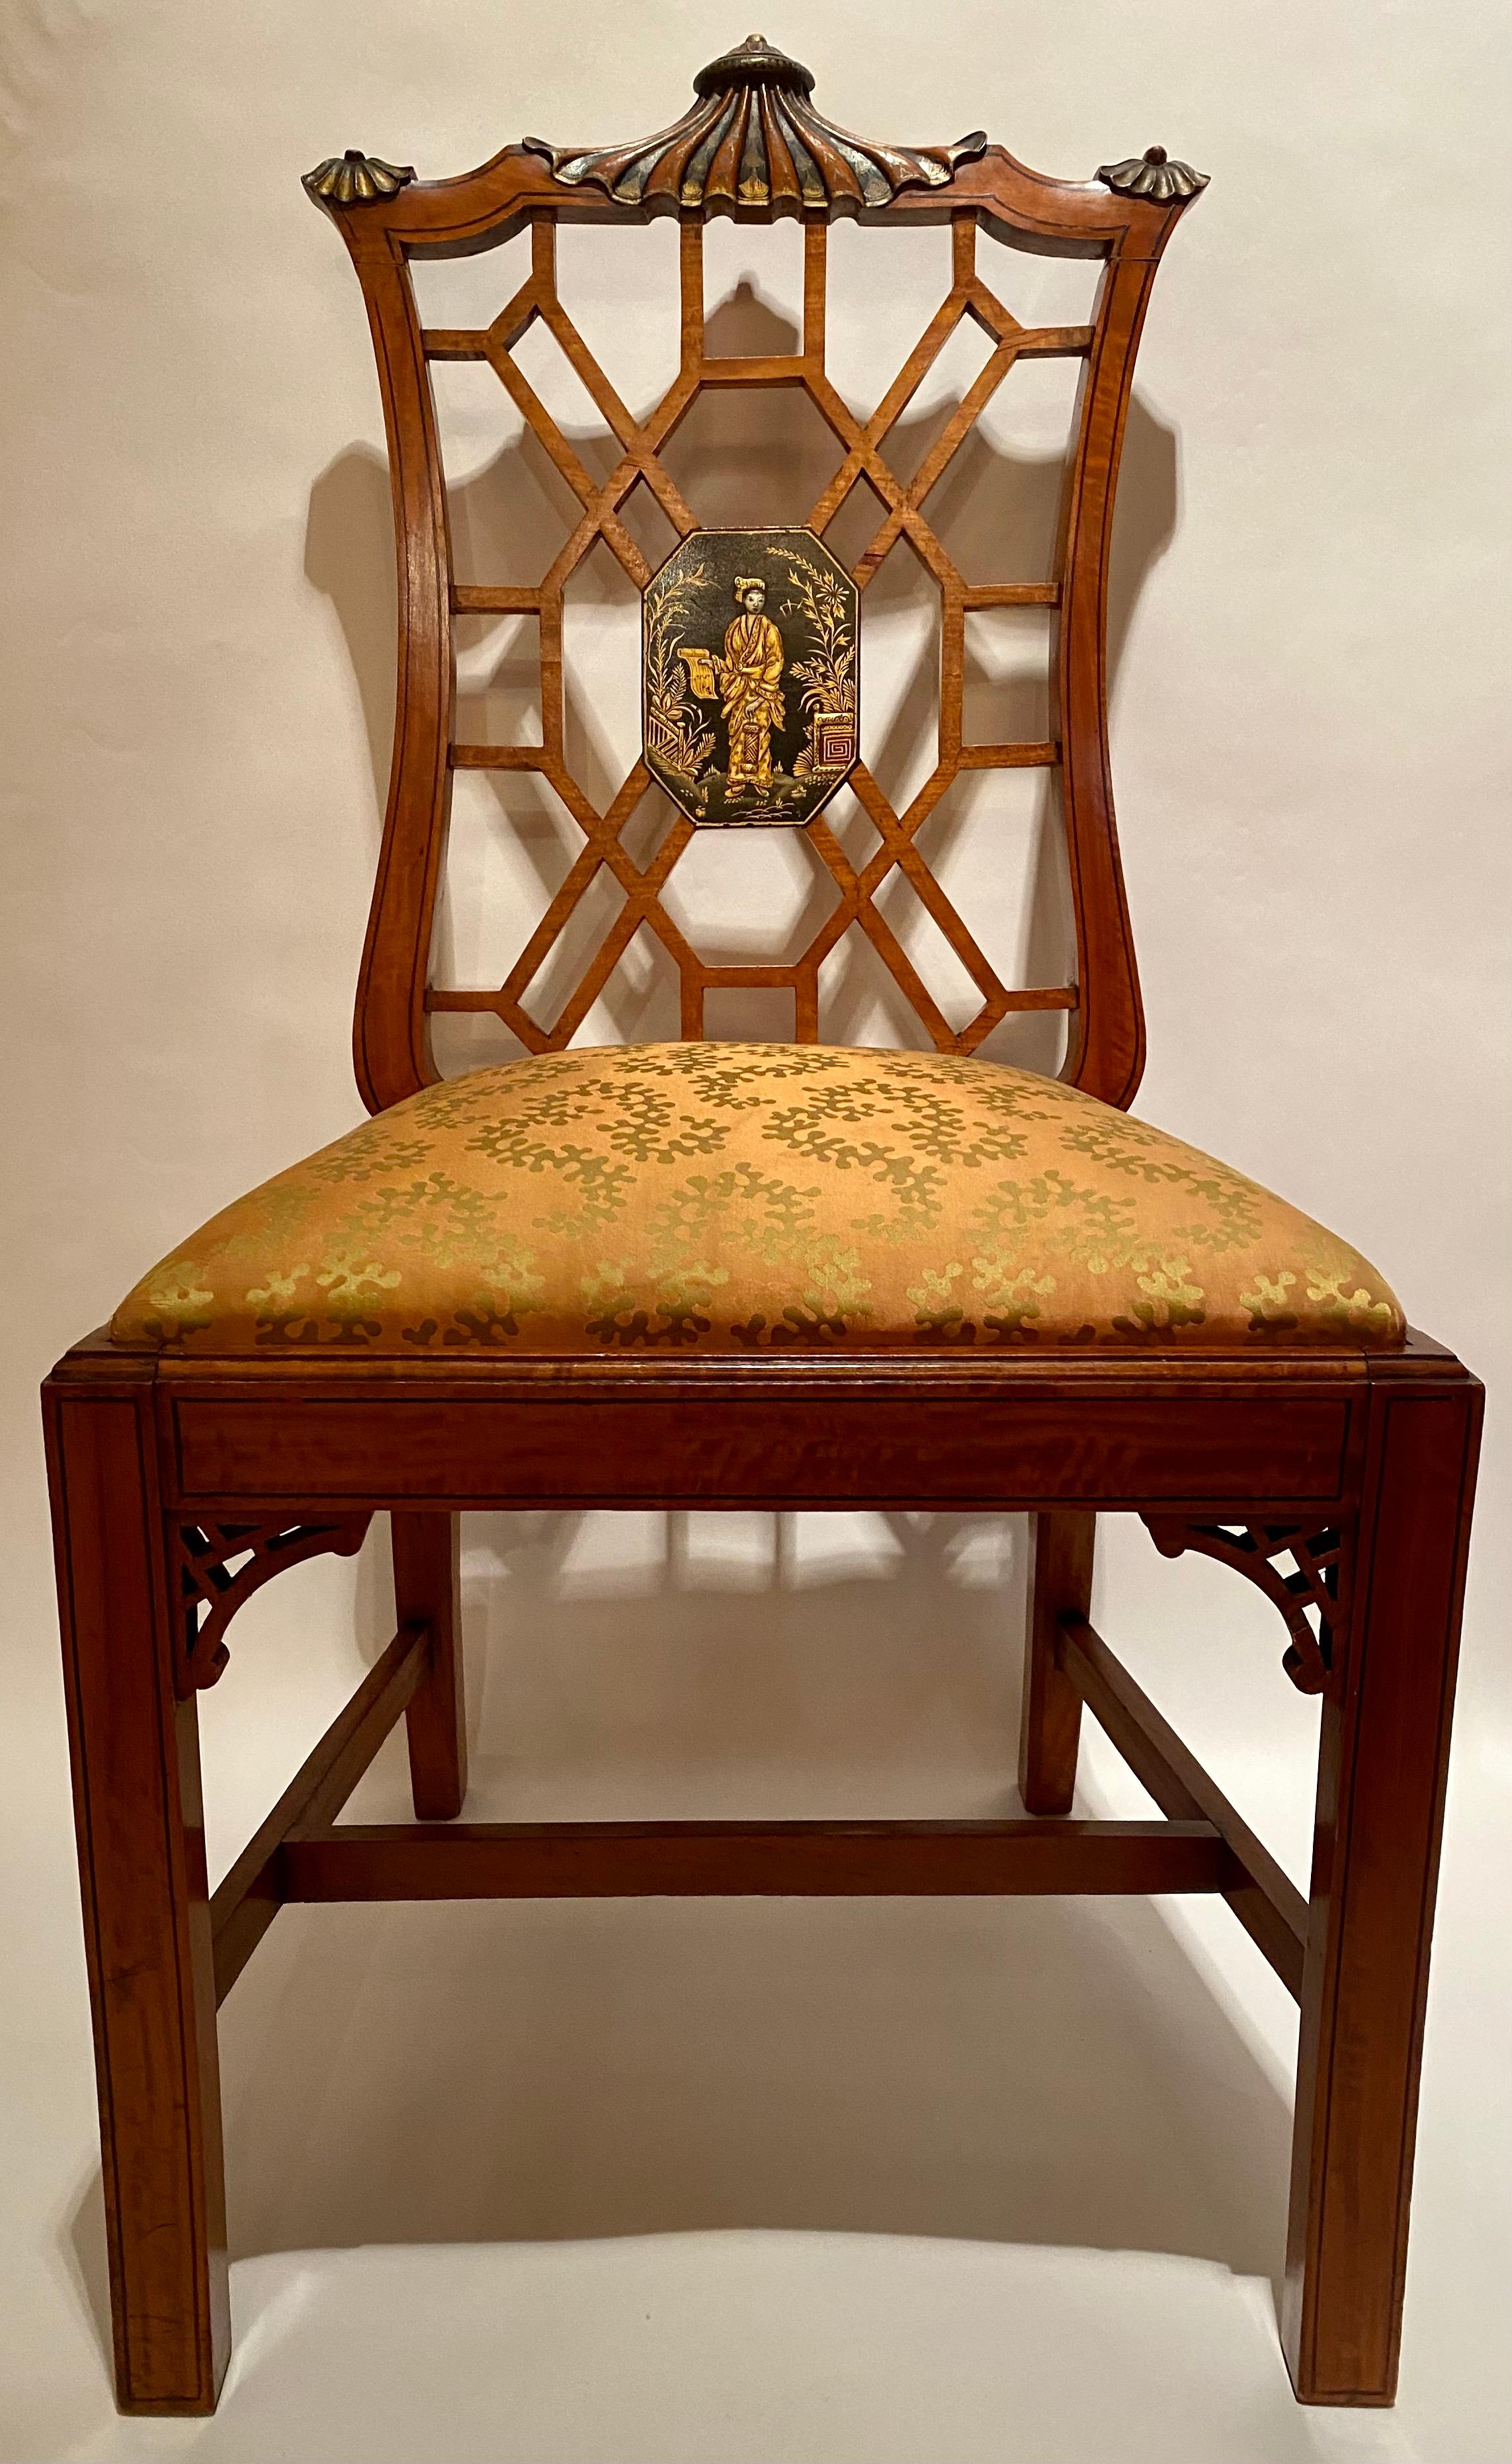 Pair antique English edwardian satinwood side chairs with chinoiserie lacquer details, Circa 1900-1910.